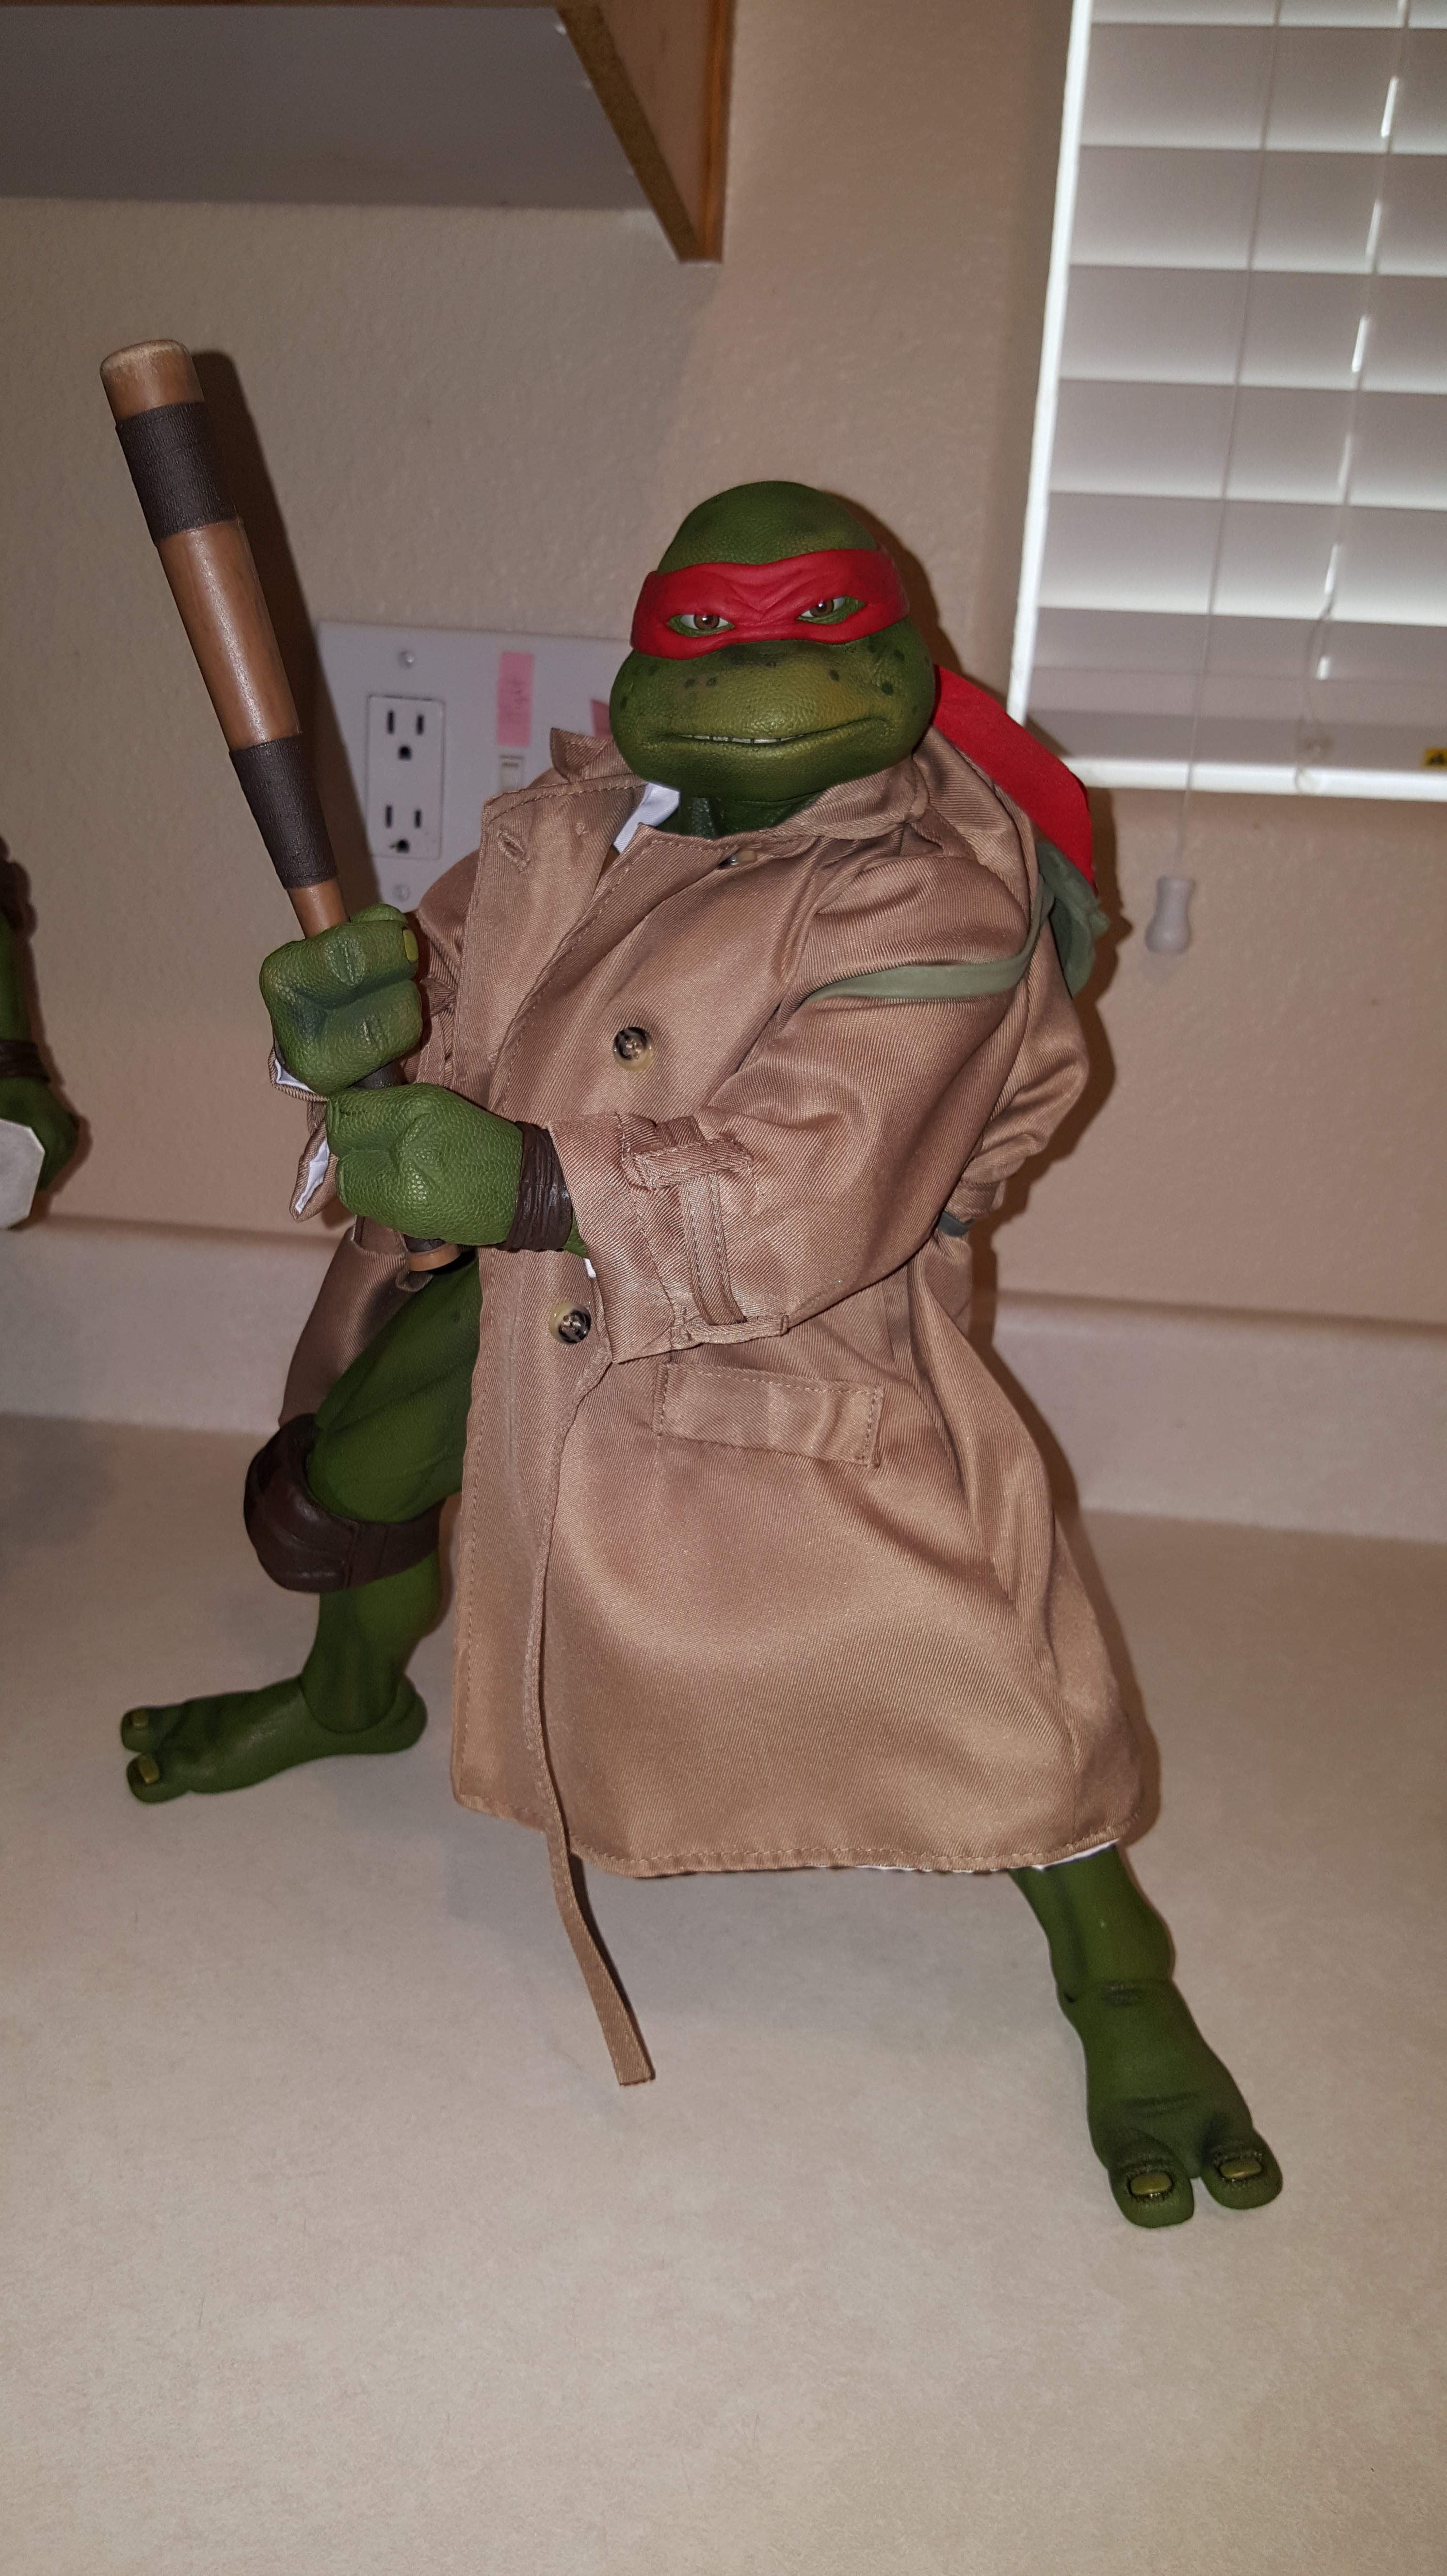 raphael in disguise